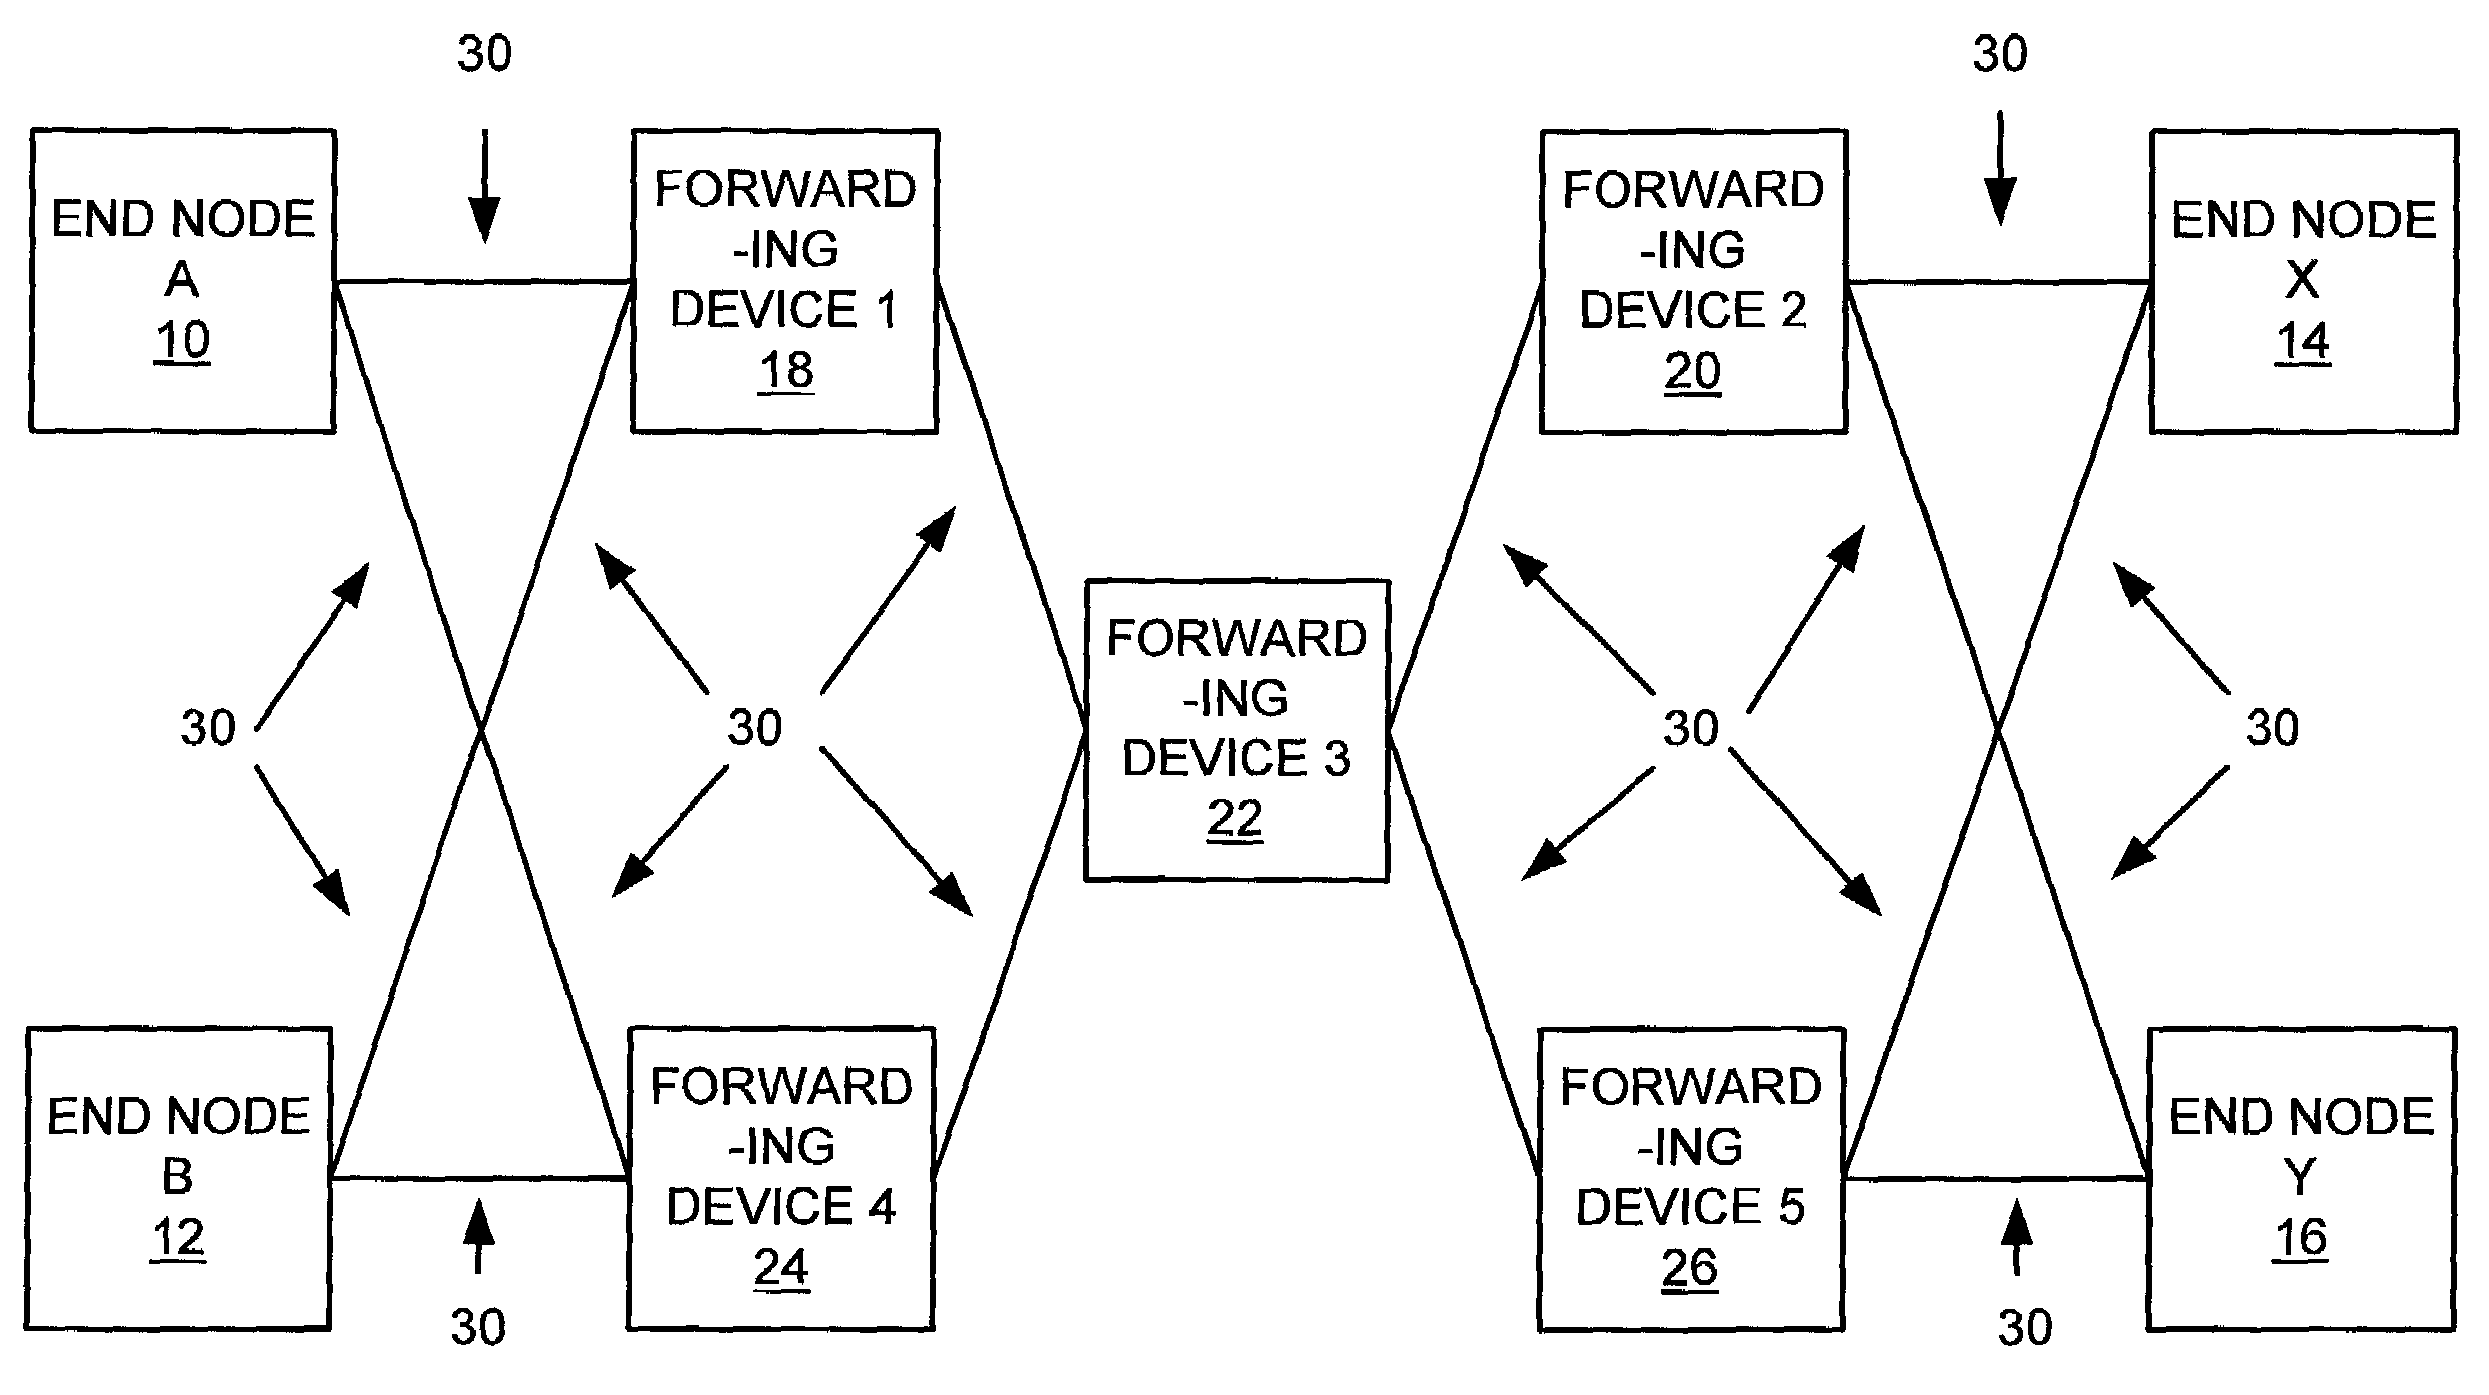 Method of optimizing network capacity and fault tolerance in deadlock-free routing